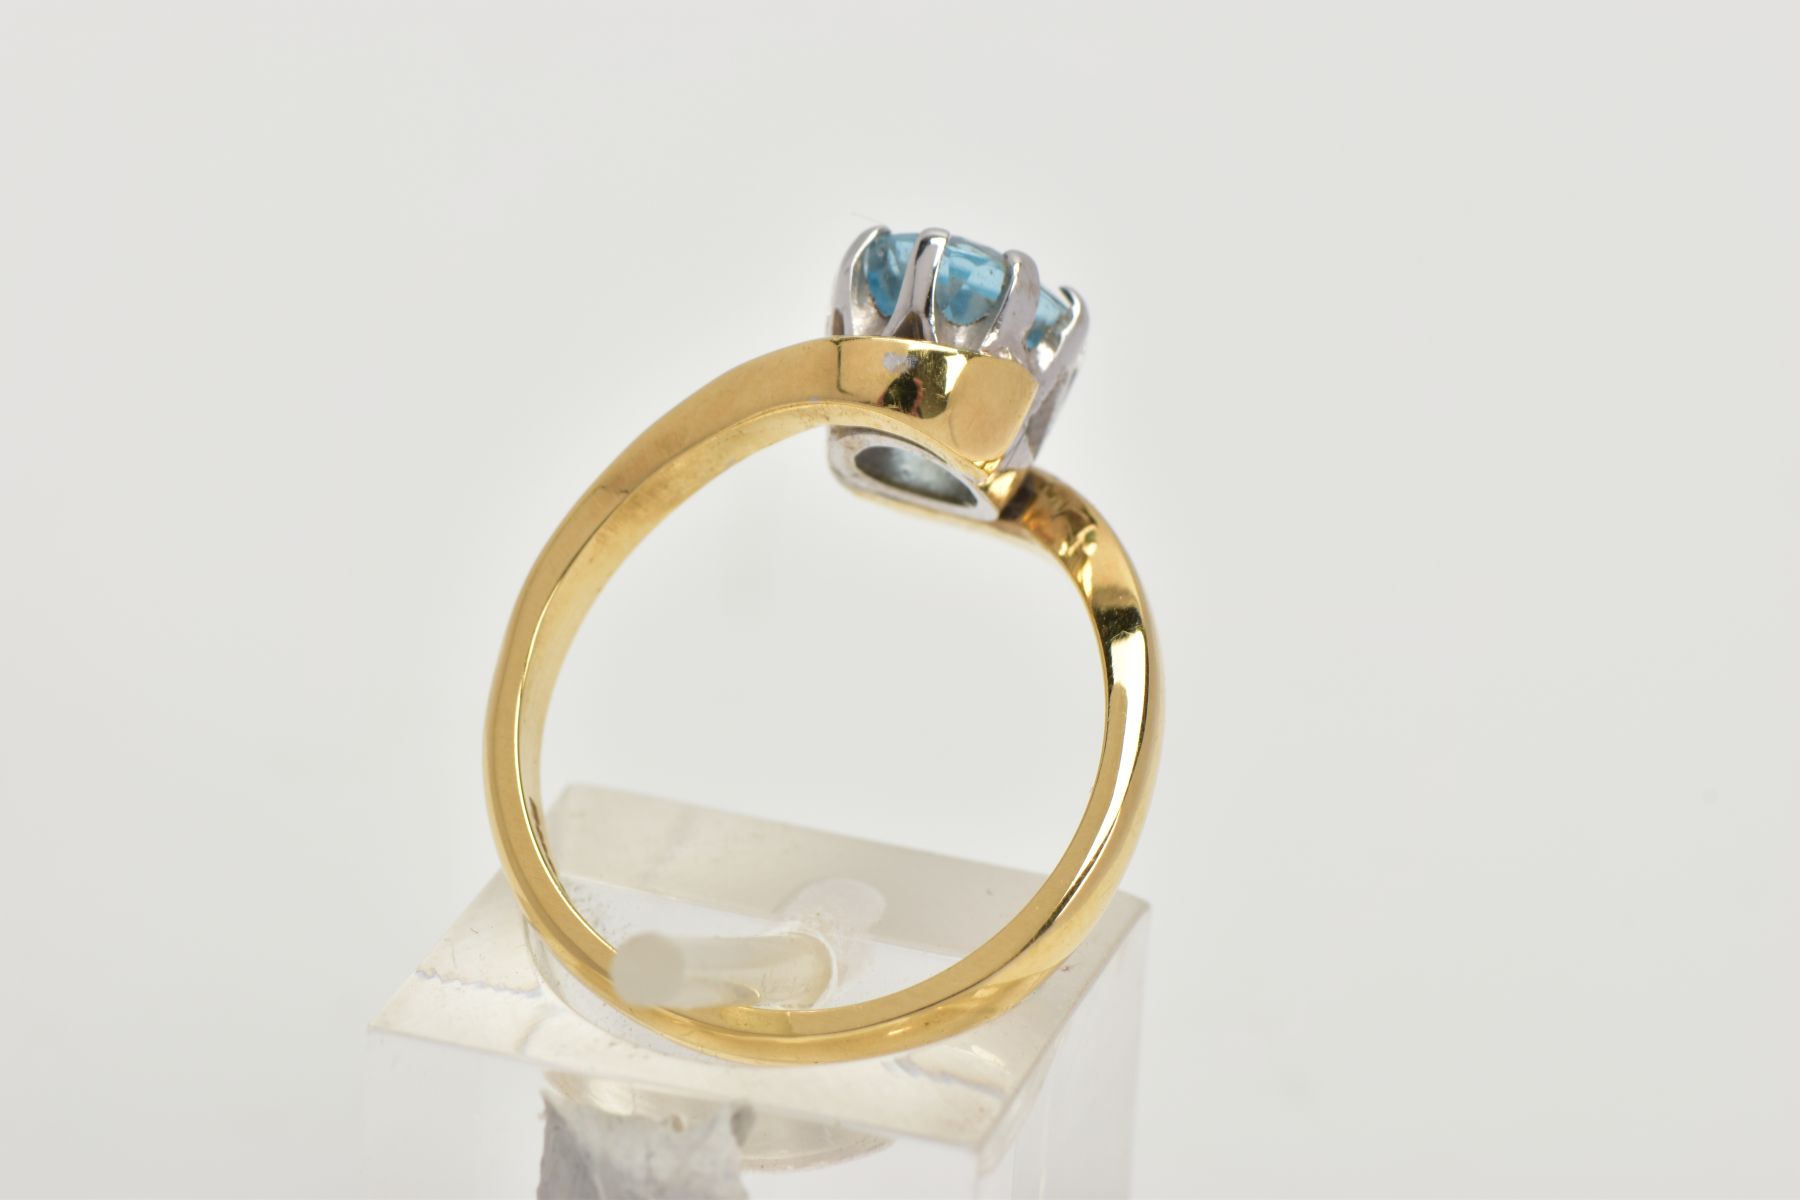 AN 18CT GOLD AQUAMARINE RING, an oval cut aquamarine, approximate dimensions length 8mm x width 6mm, - Image 3 of 4